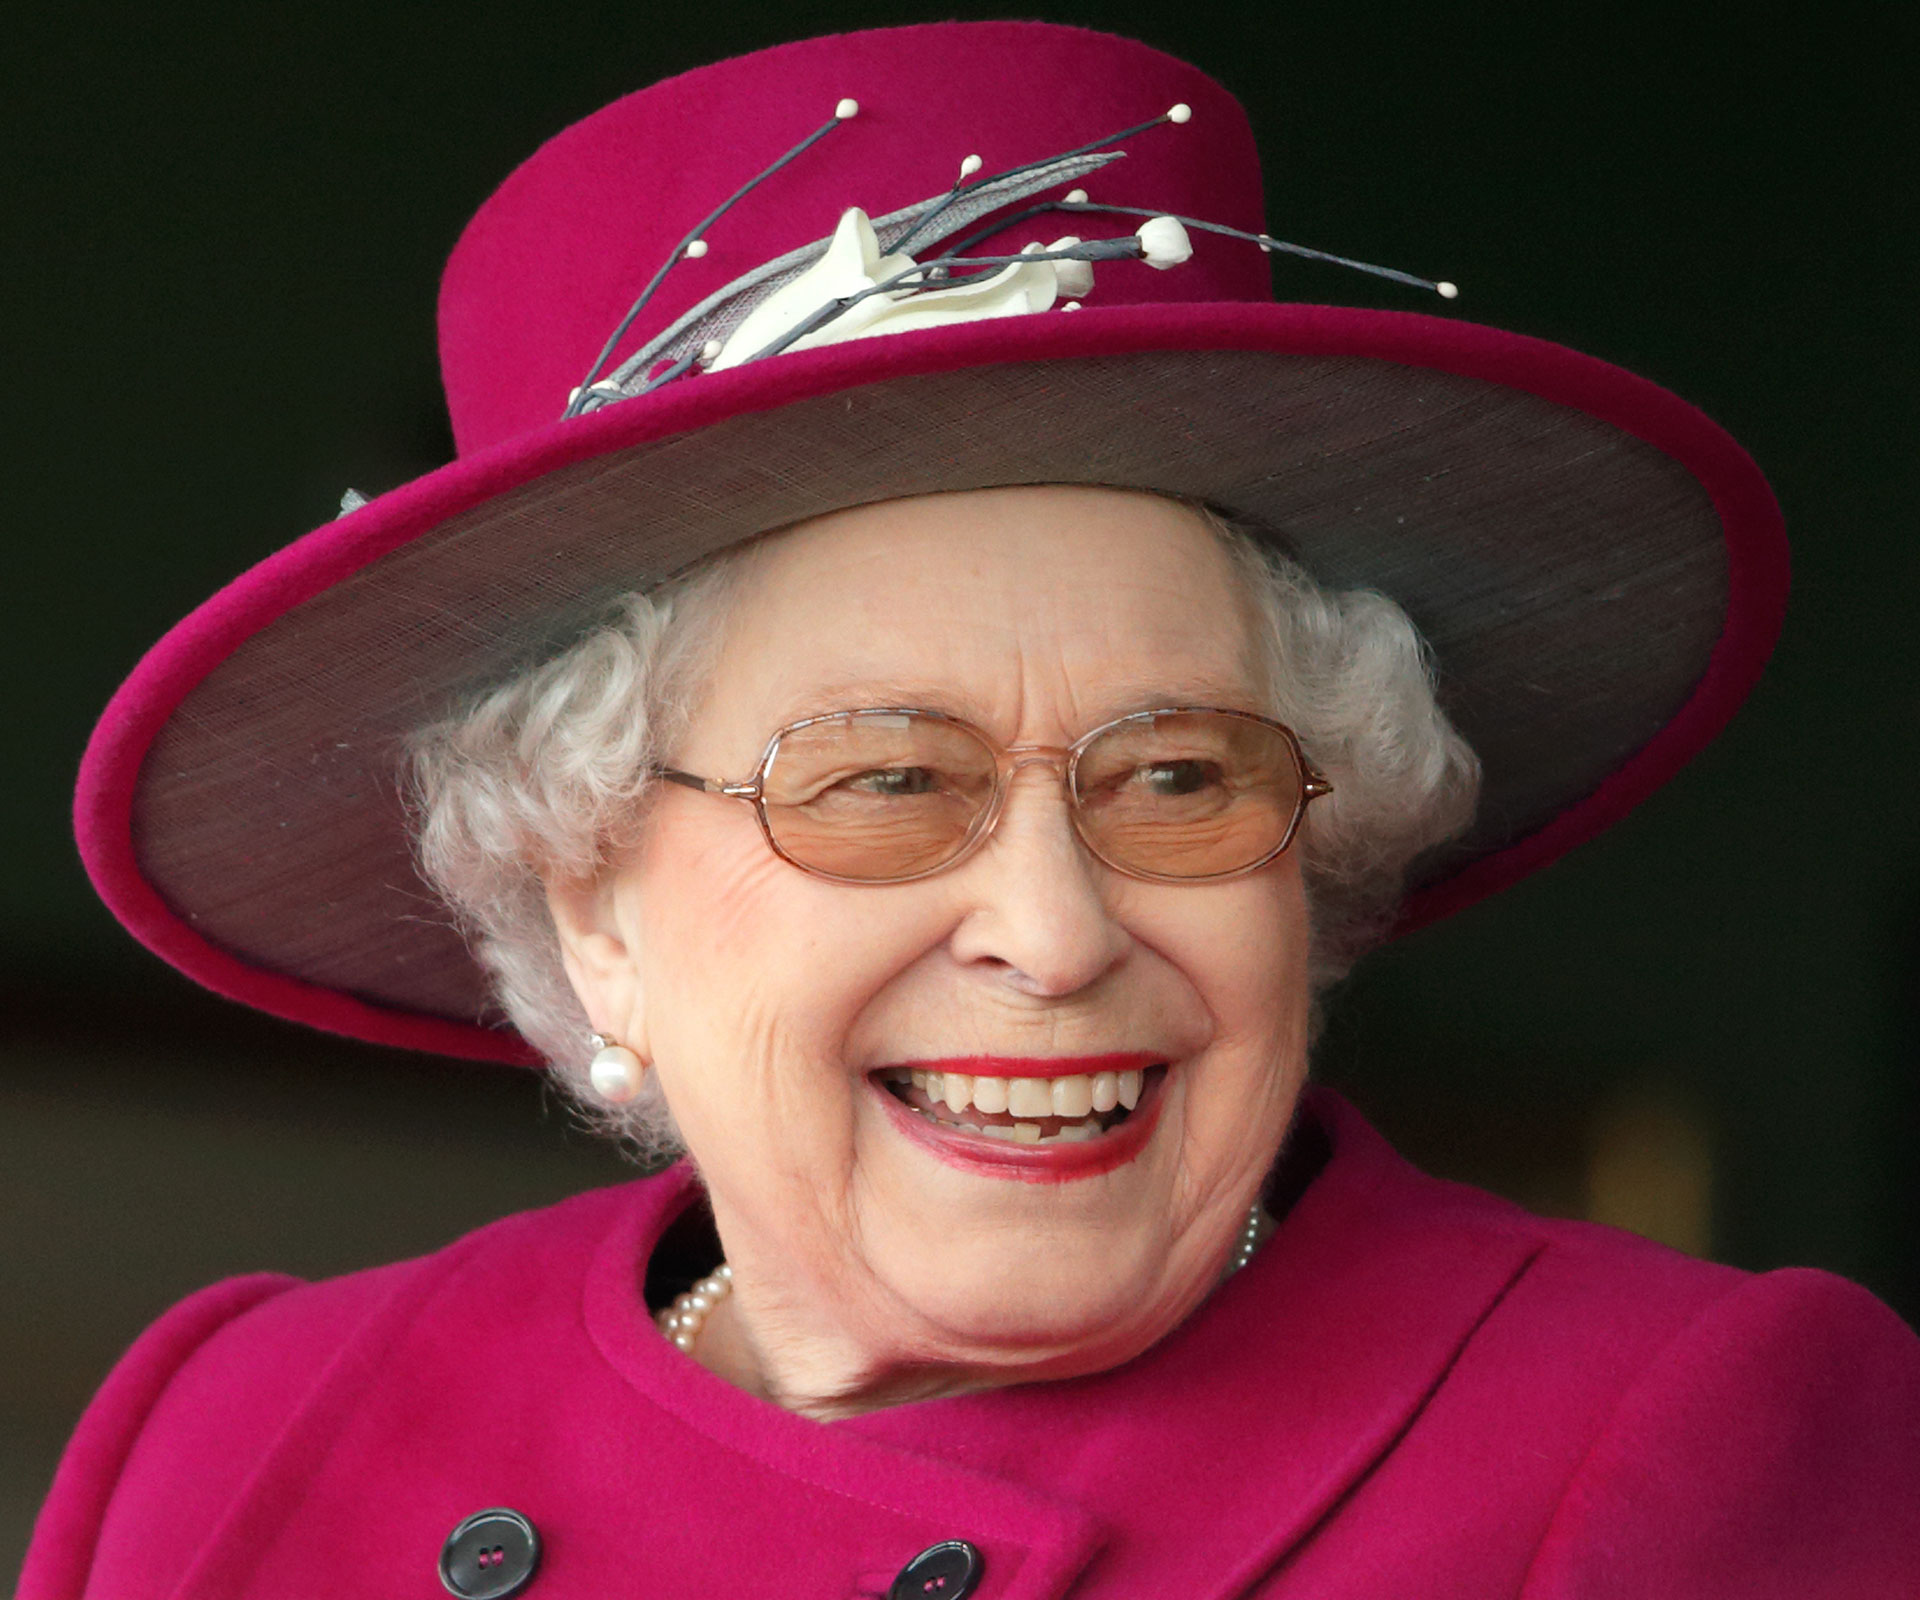 It’s the Queen’s birthday! Could the royal baby arrive on the same day?